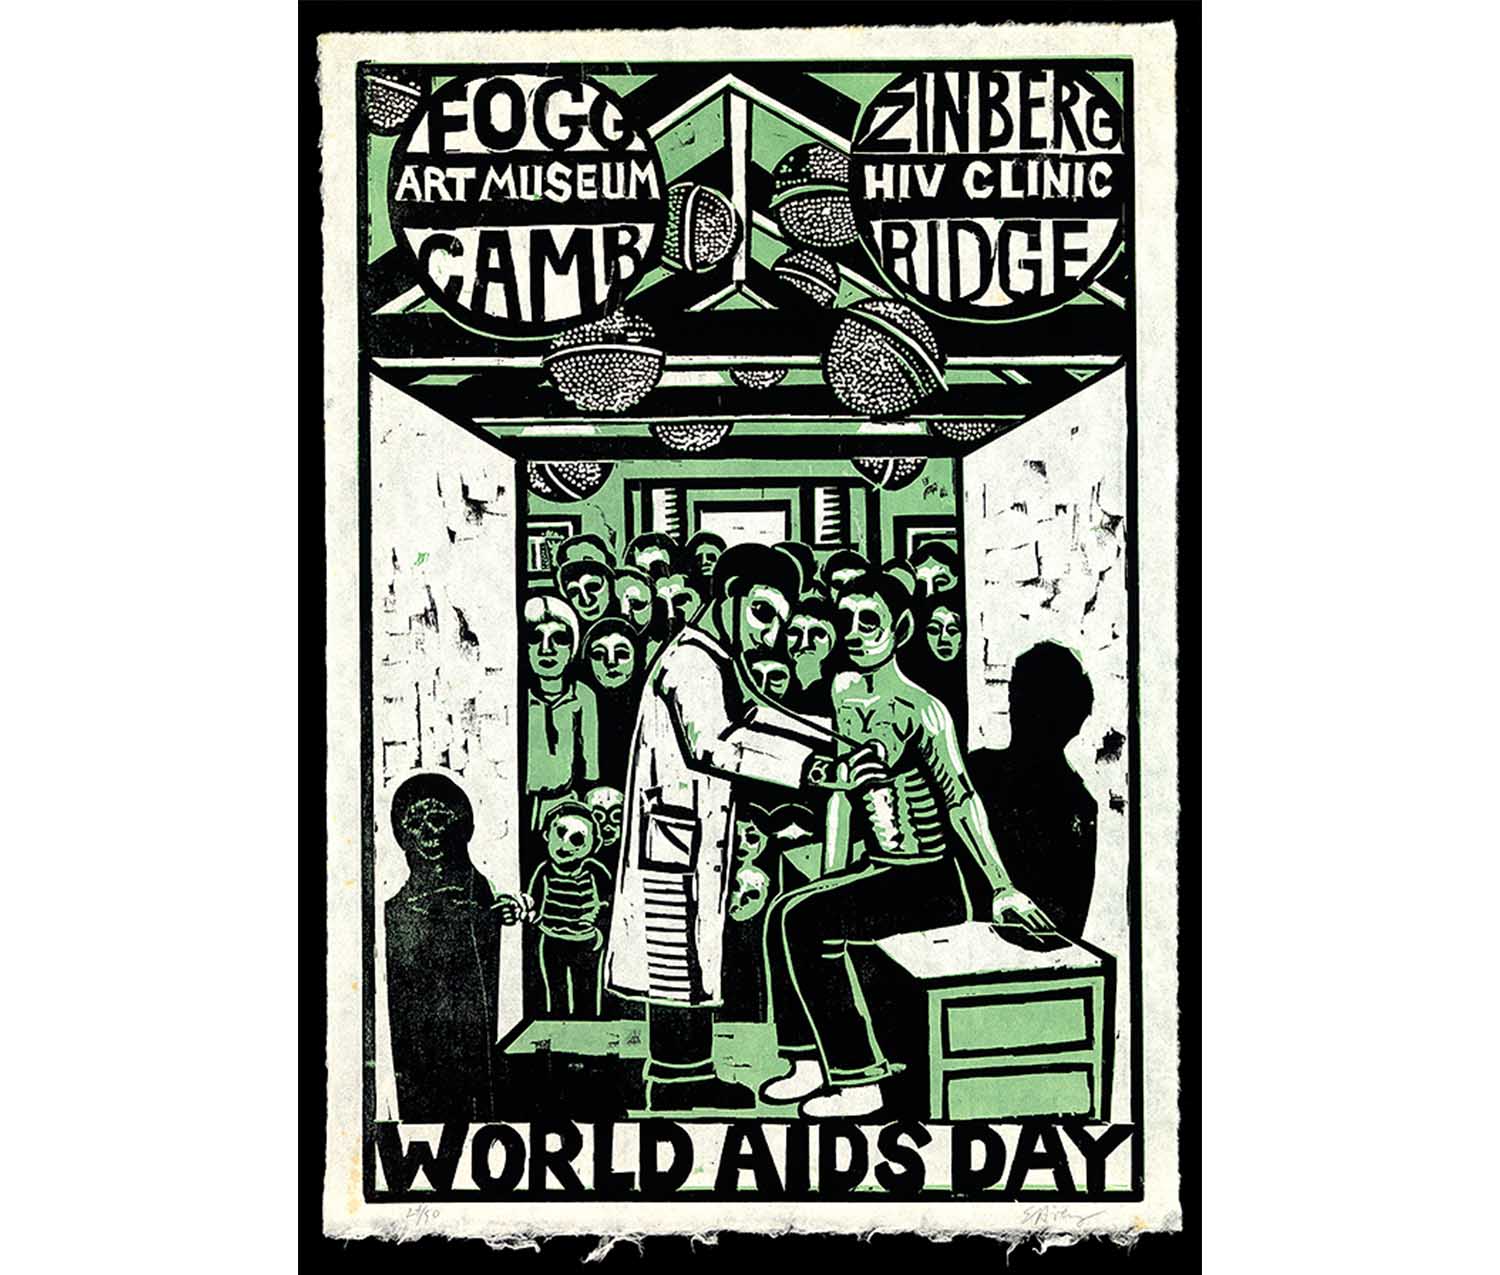 doctor examining a man sitting on a table, both crowded by other figures, men, women and children, with death's head at left, with text: FOGG / ART MUSEUM / CAMB at left, ZINBERG / HIV CLINIC / BRIDGE at right, WORLD AIDS DAY along bottom